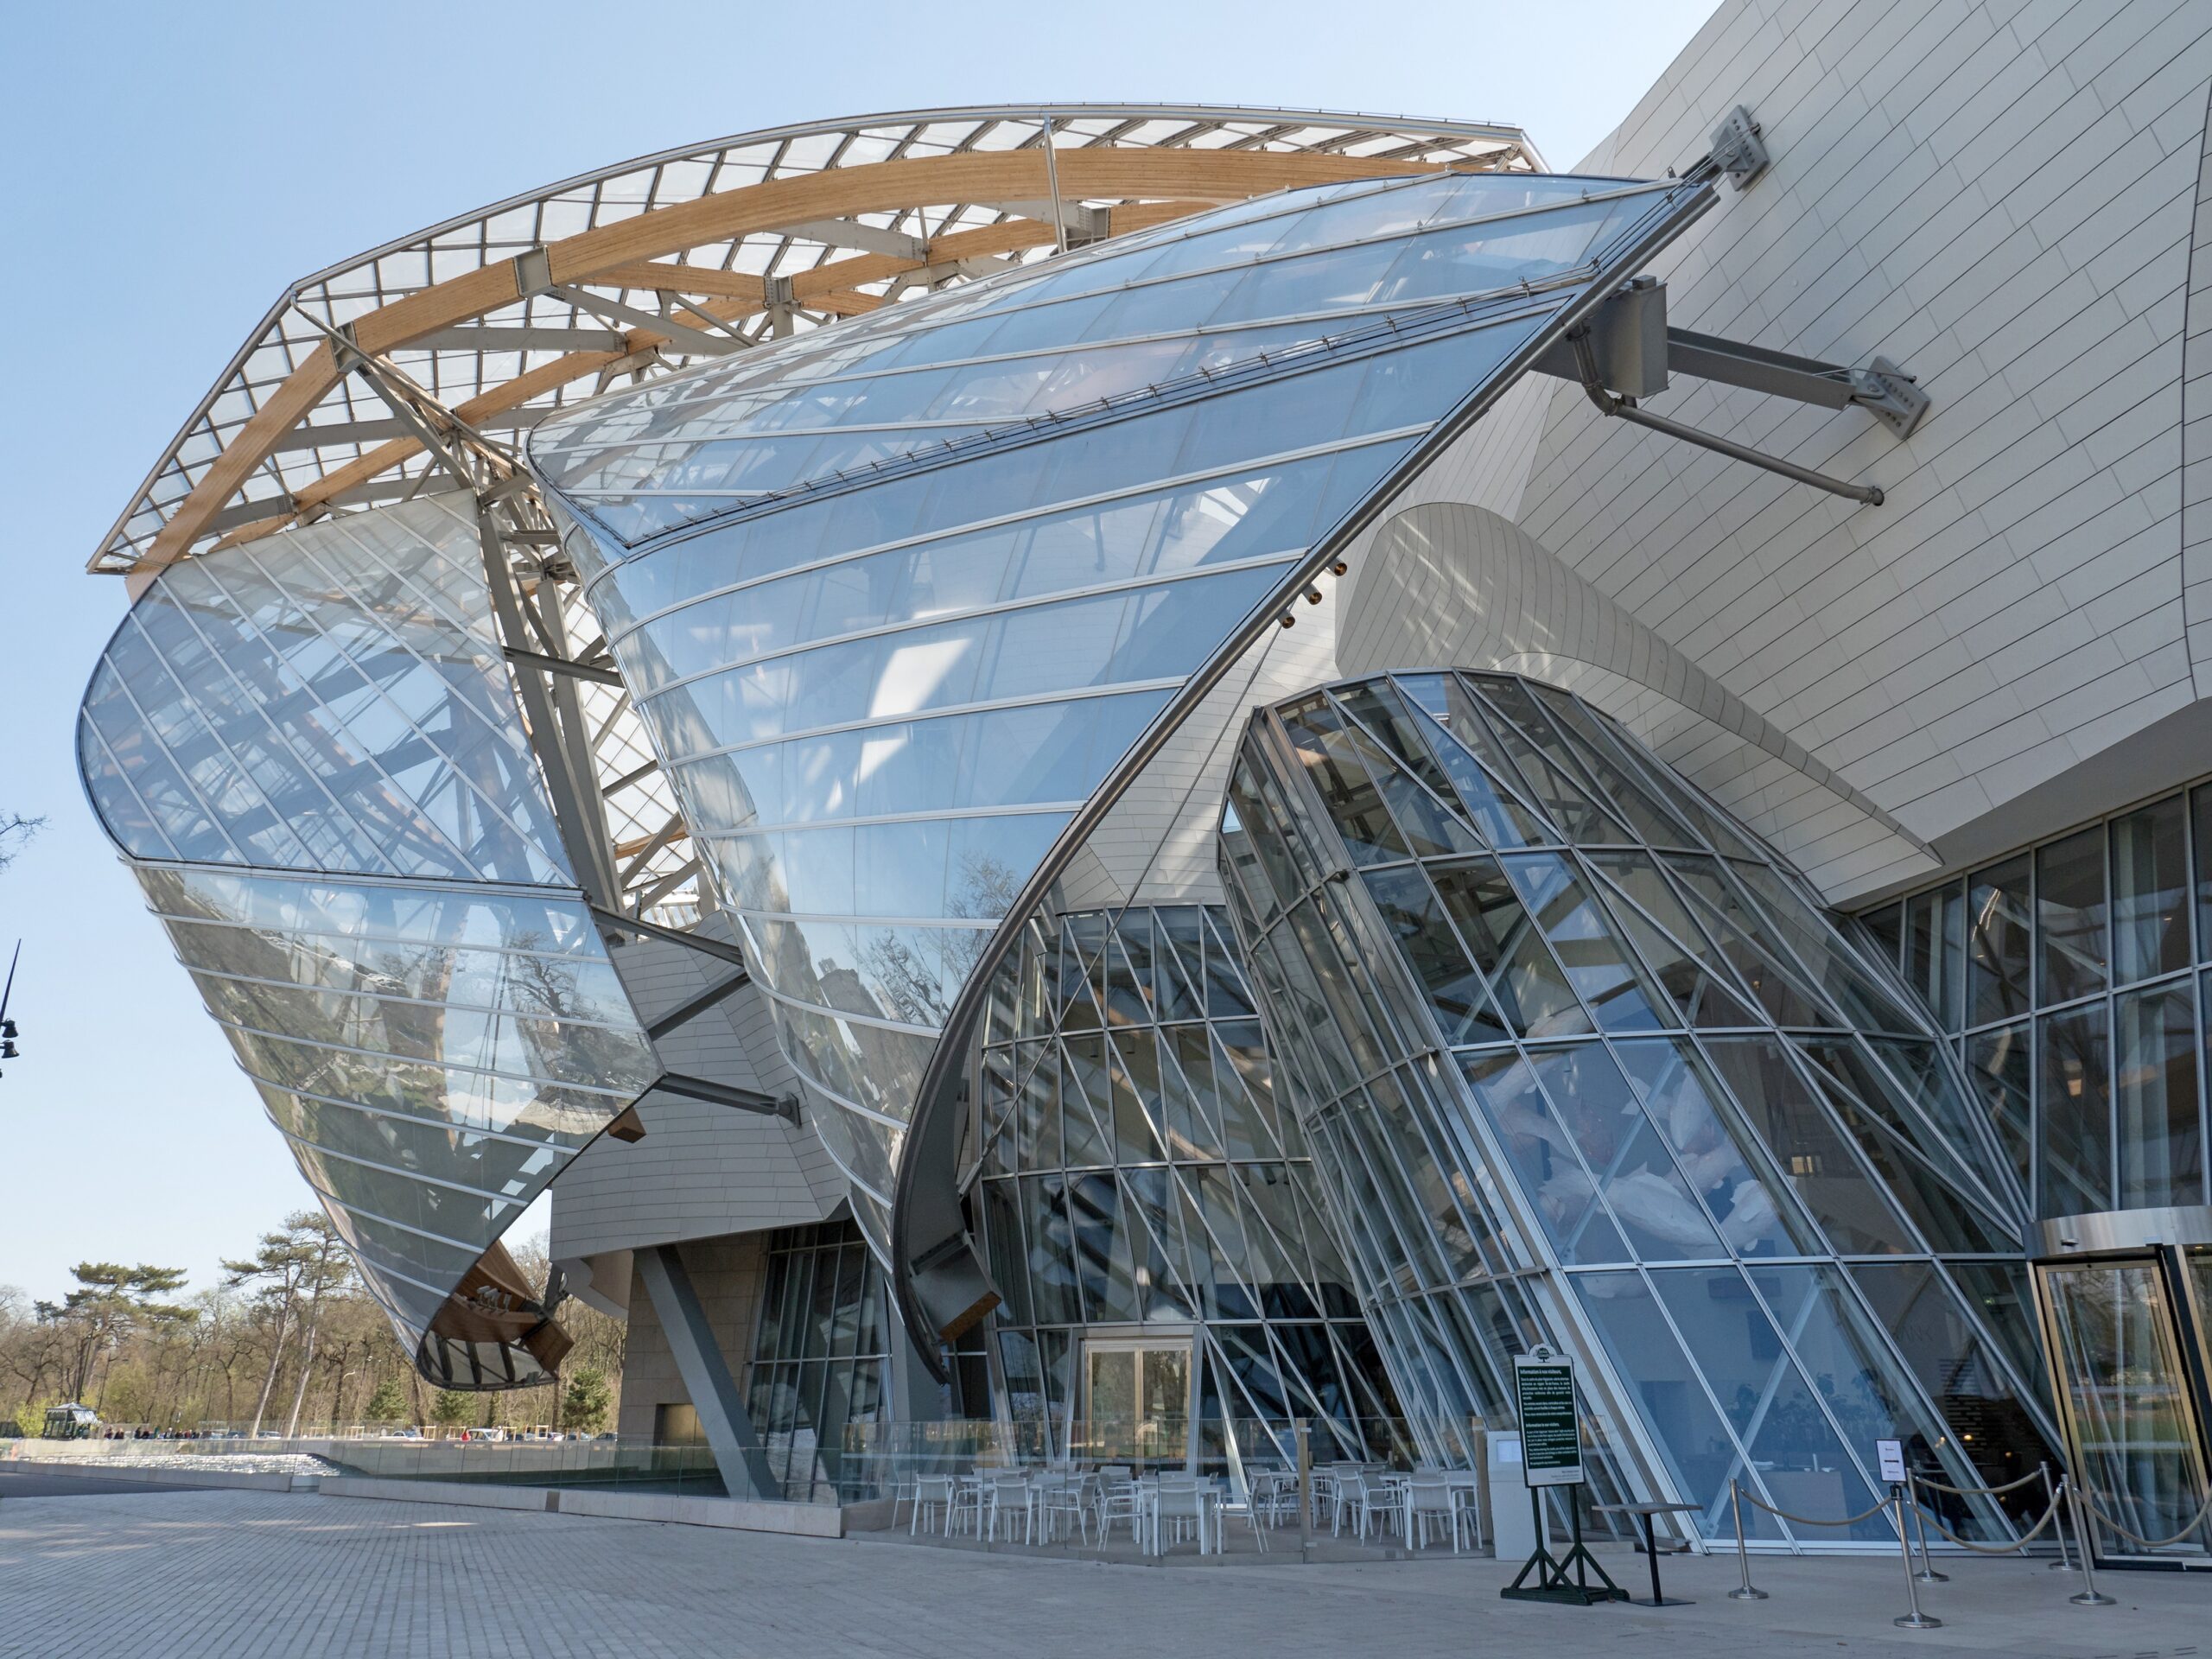 Complete Guide to the Fondation Louis Vuitton Museum (Visits